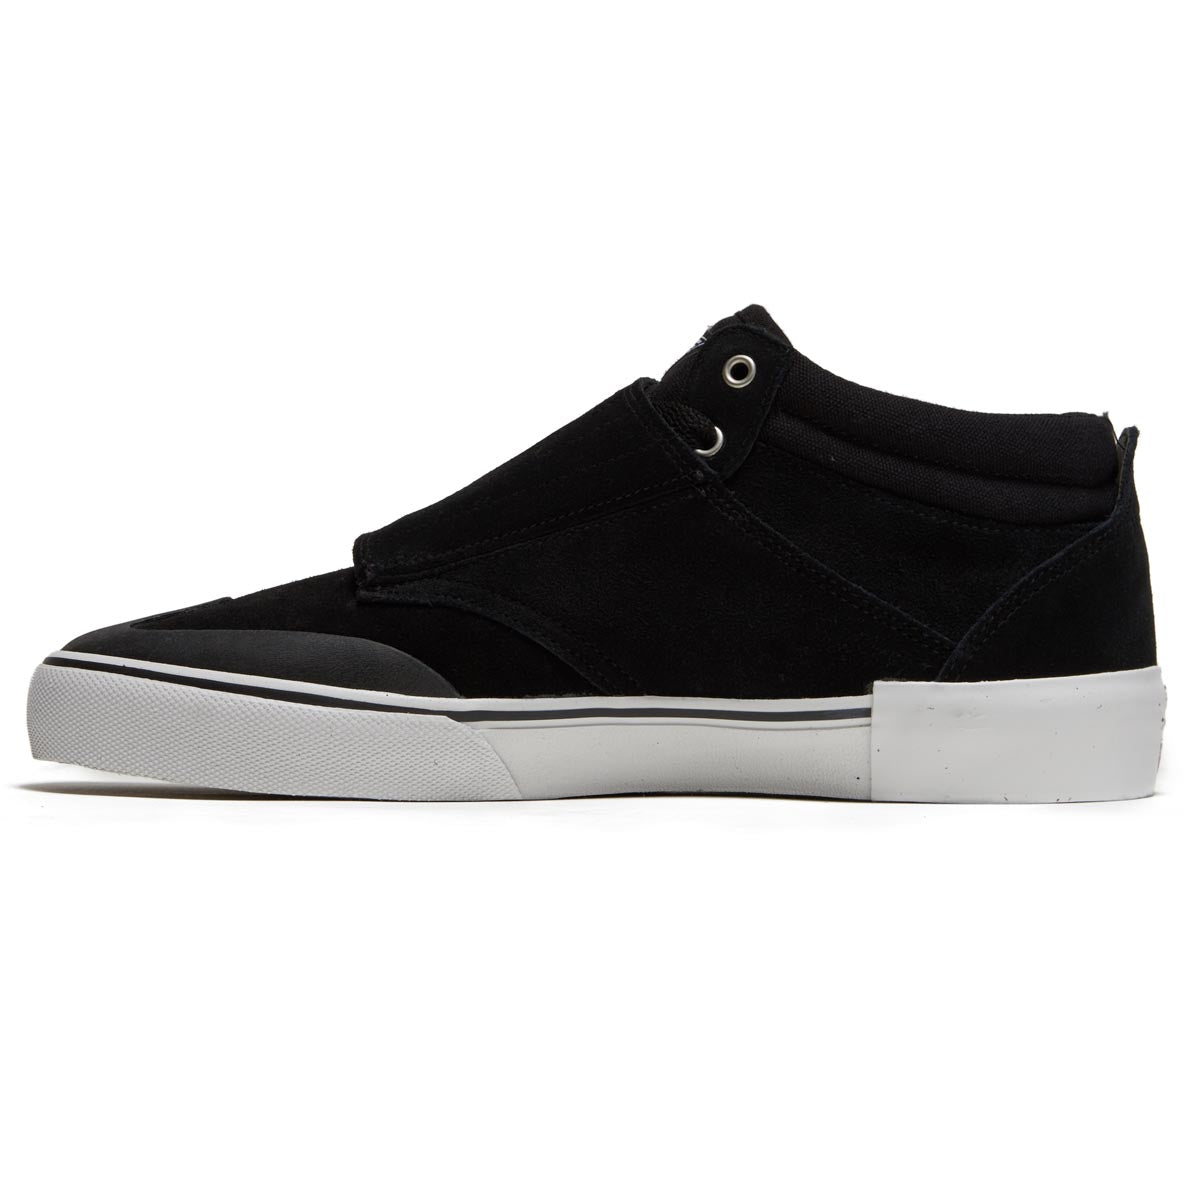 Etnies Andy Anderson Shoes - Black/White image 2